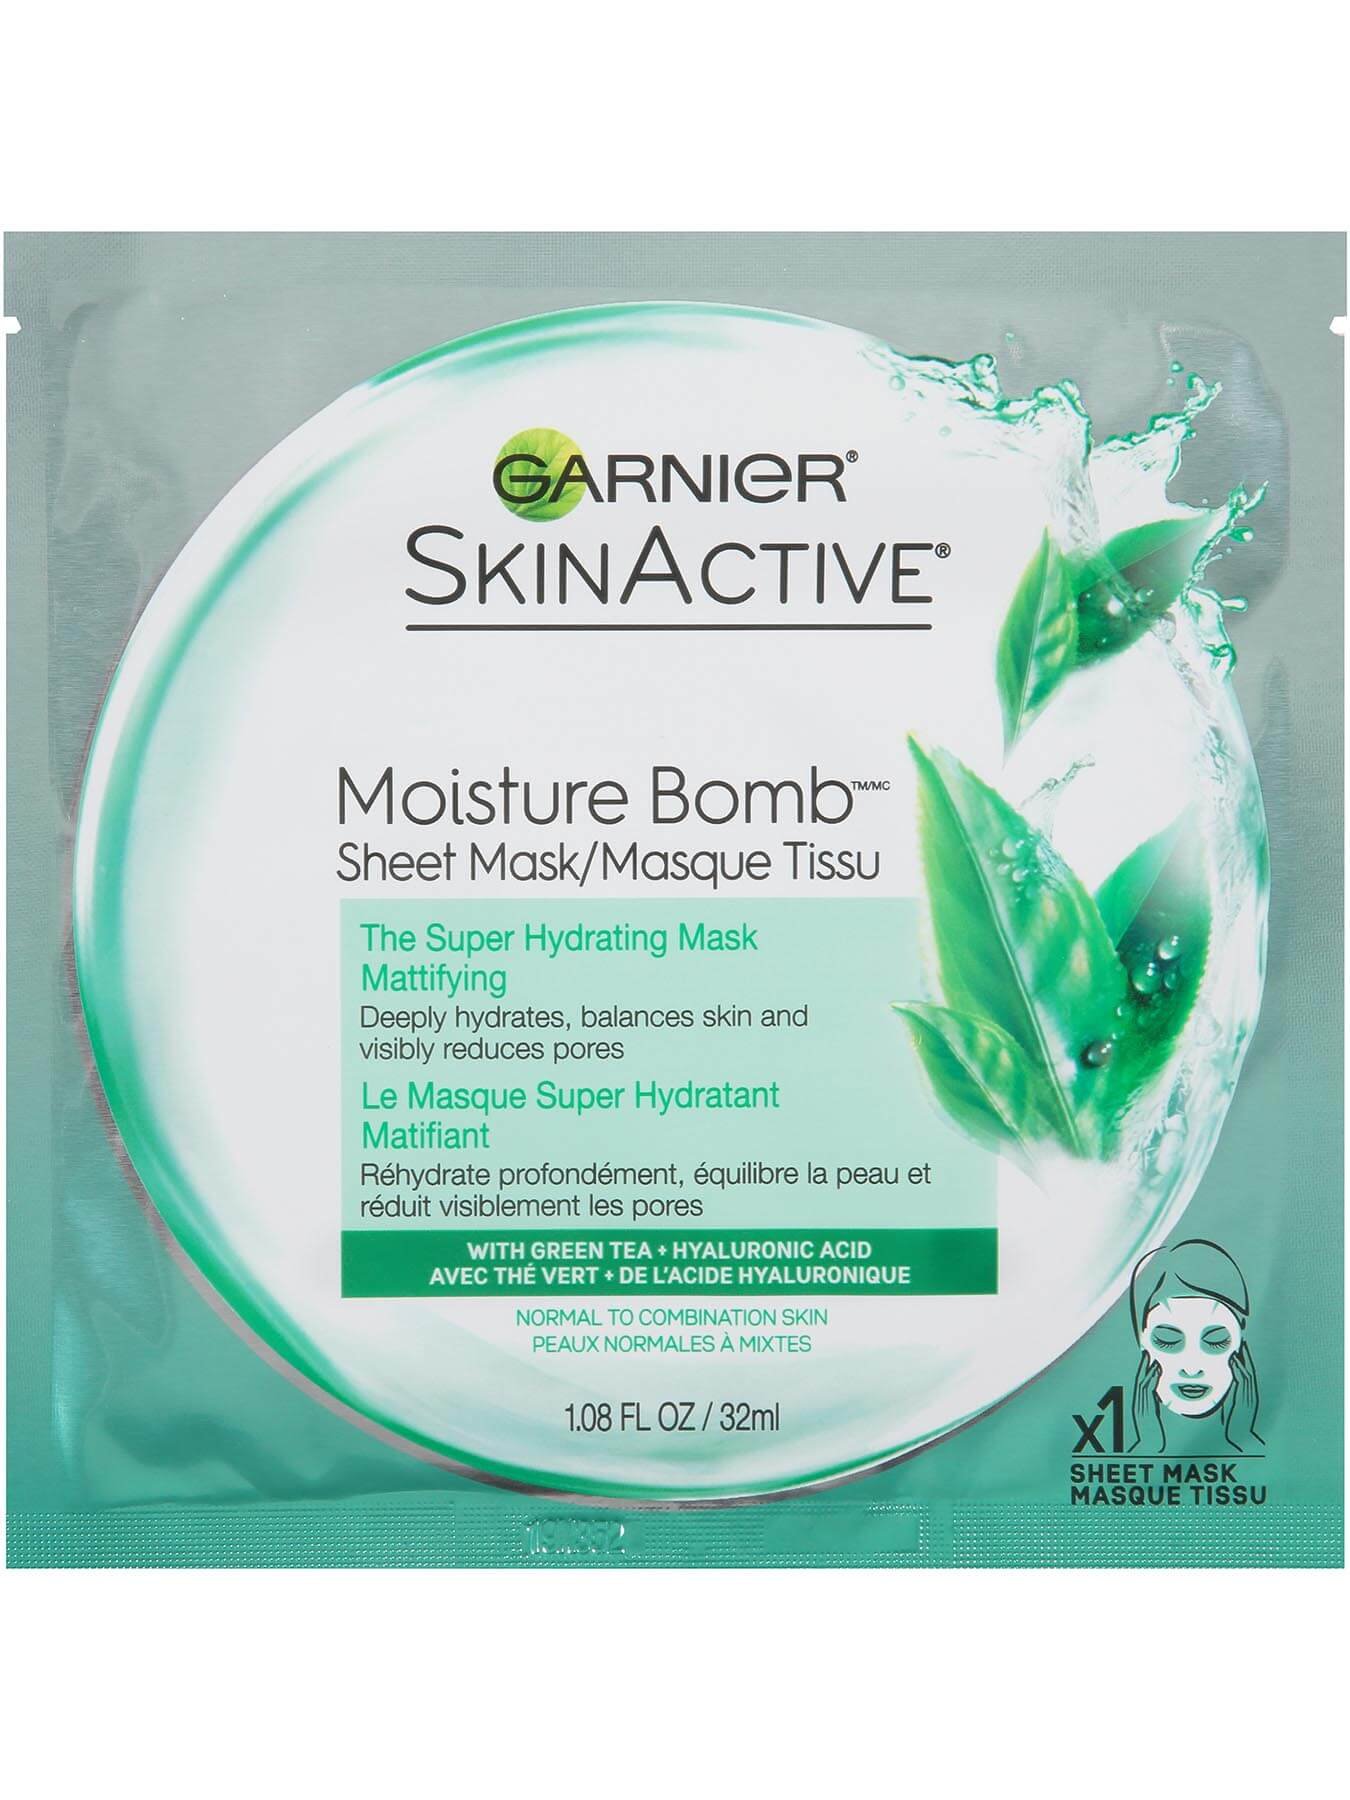 Front view of The Super Hydrating Sheet Mask - Mattifying.